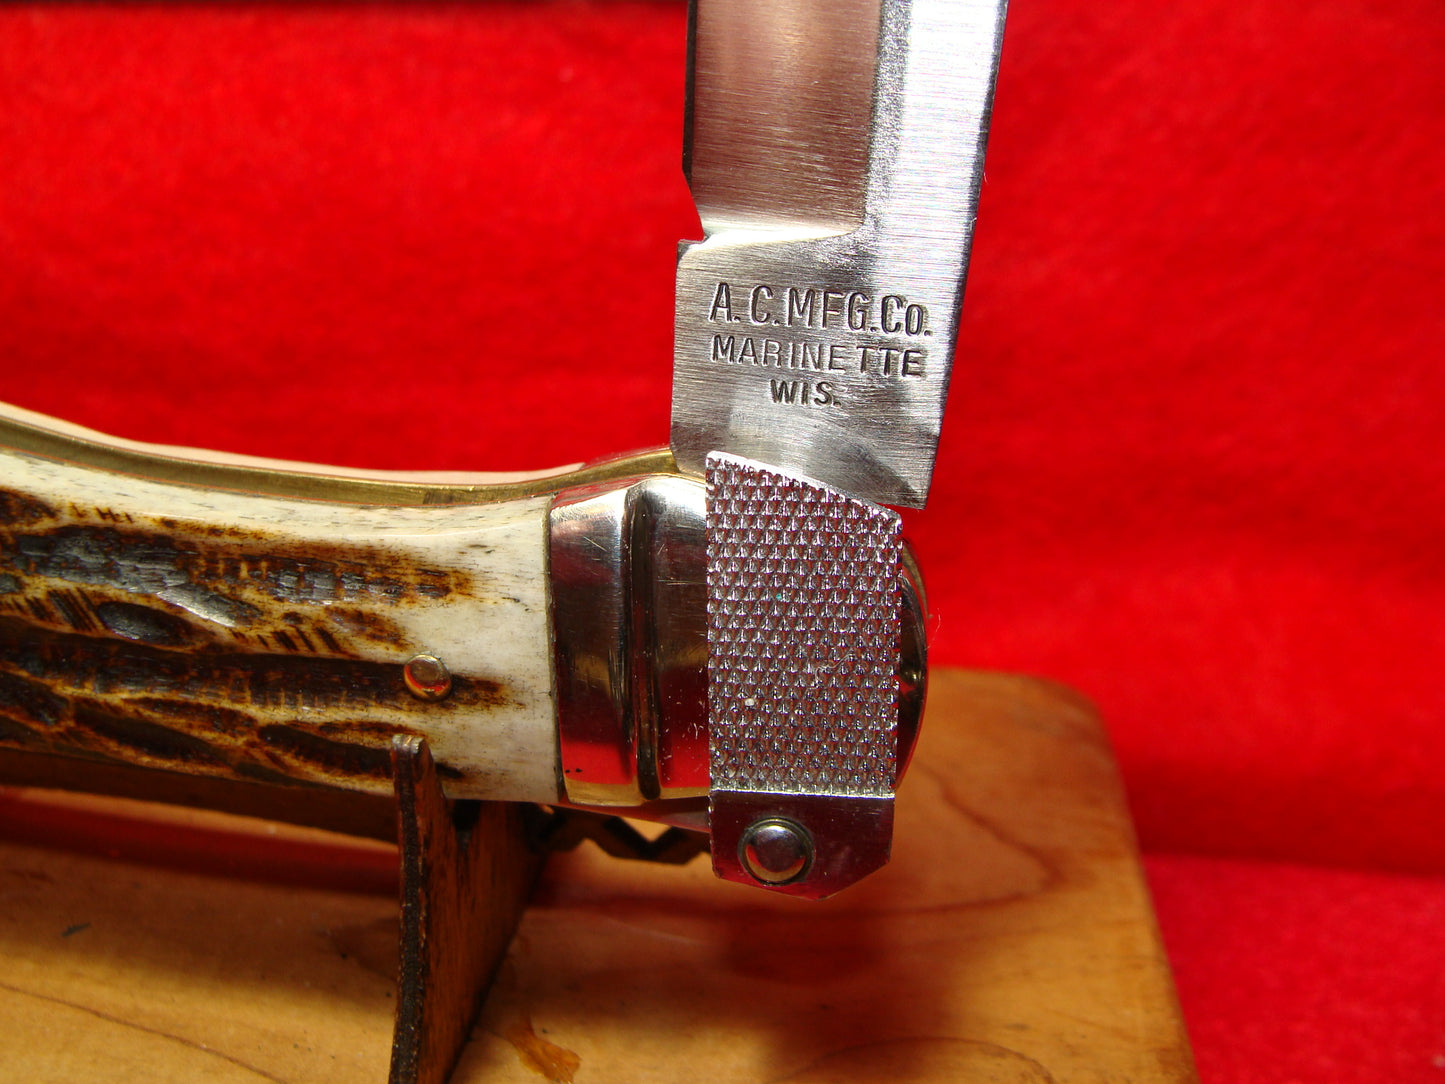 A.C. MFG CO. AERIAL KNIFE CO. PAT. 1916 LEVER AUTOMATIC VINTAGE AMERICAN AUTOMATIC KNIFE JIGGED BONE HANDLES